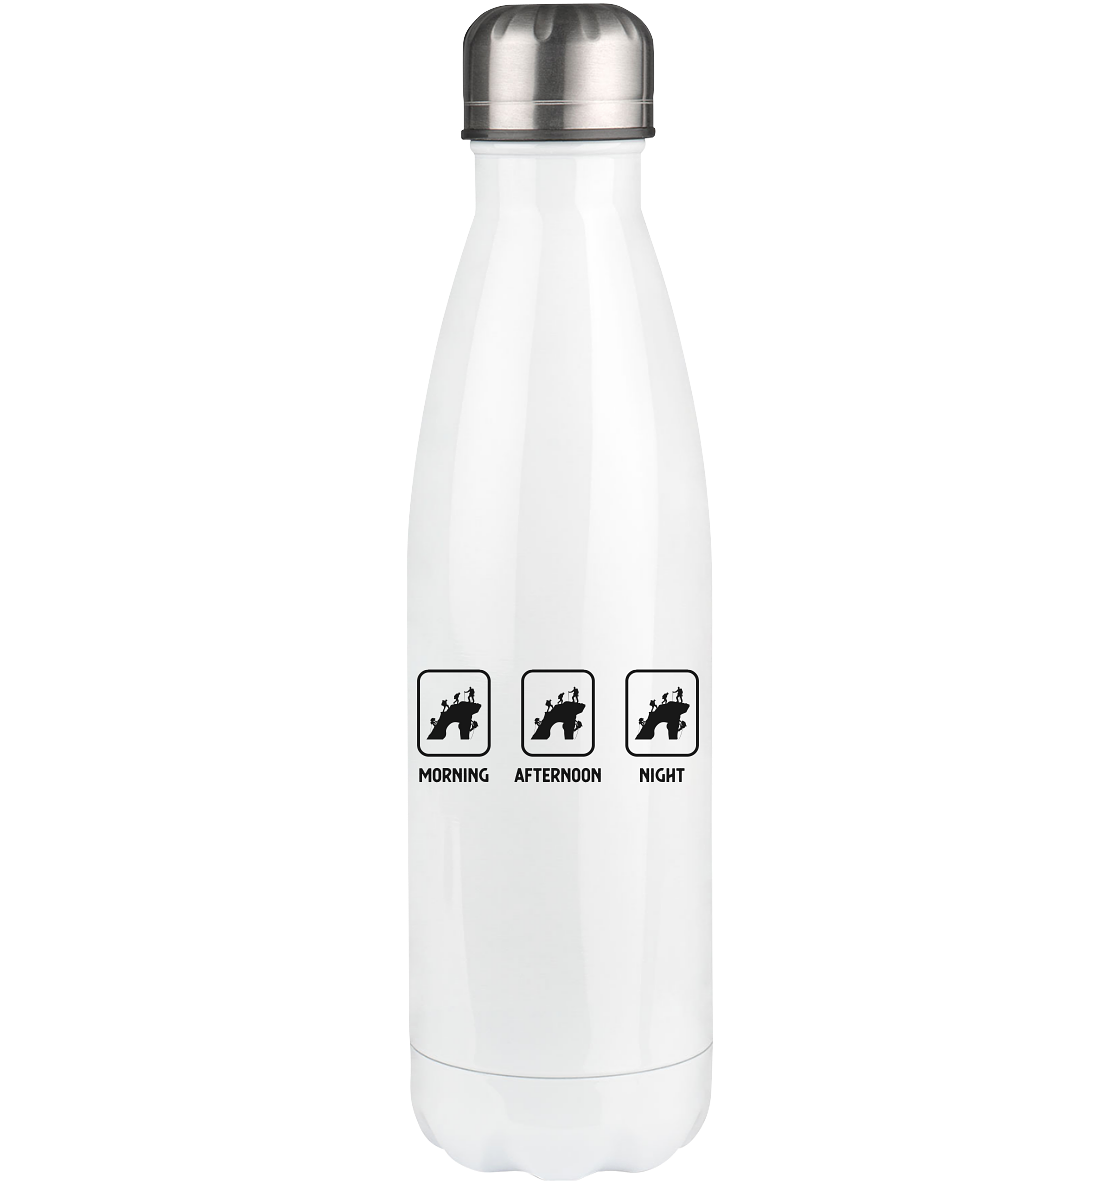 Morning Afternoon Night and Climbing - Edelstahl Thermosflasche klettern 500ml